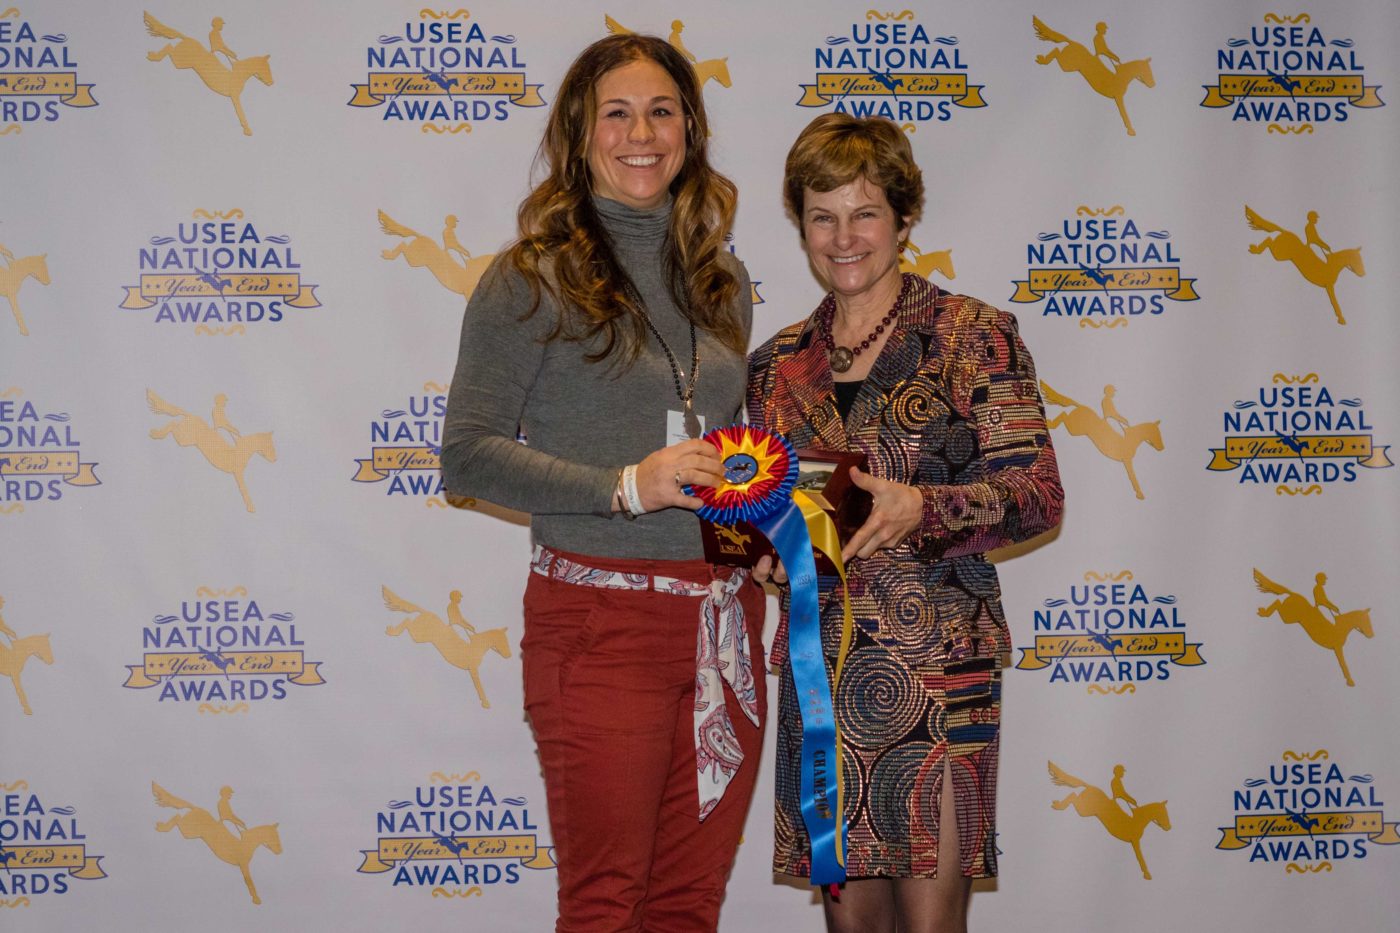 Michelle Koppin - Preliminary Master Amateur Rider of the Year.